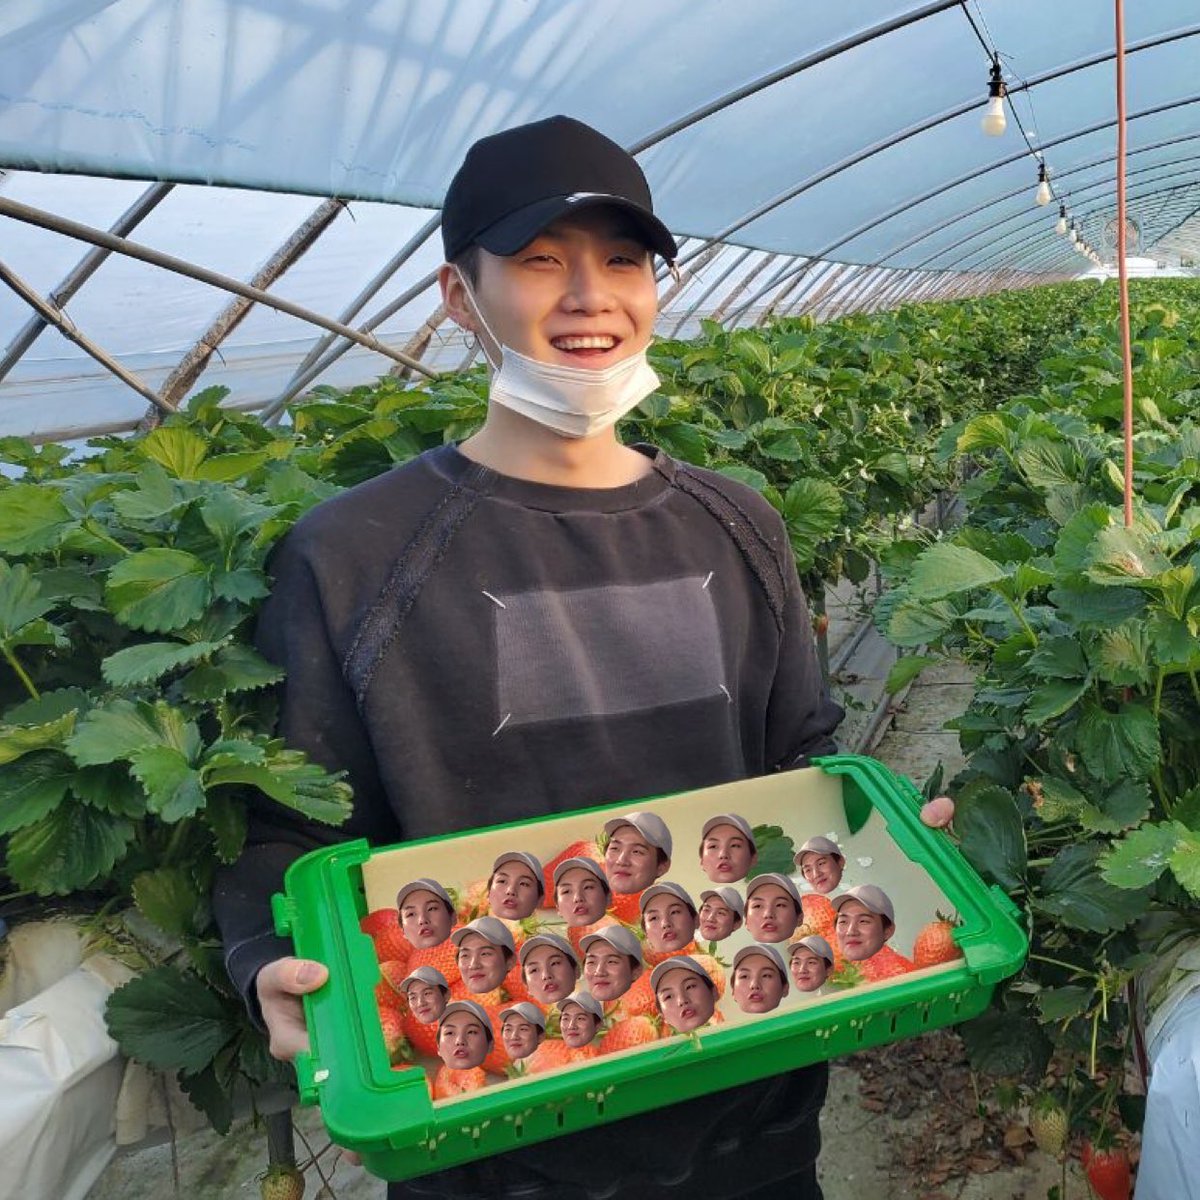 a thread of some strawberry yoongis for safekeeping and also for world peace